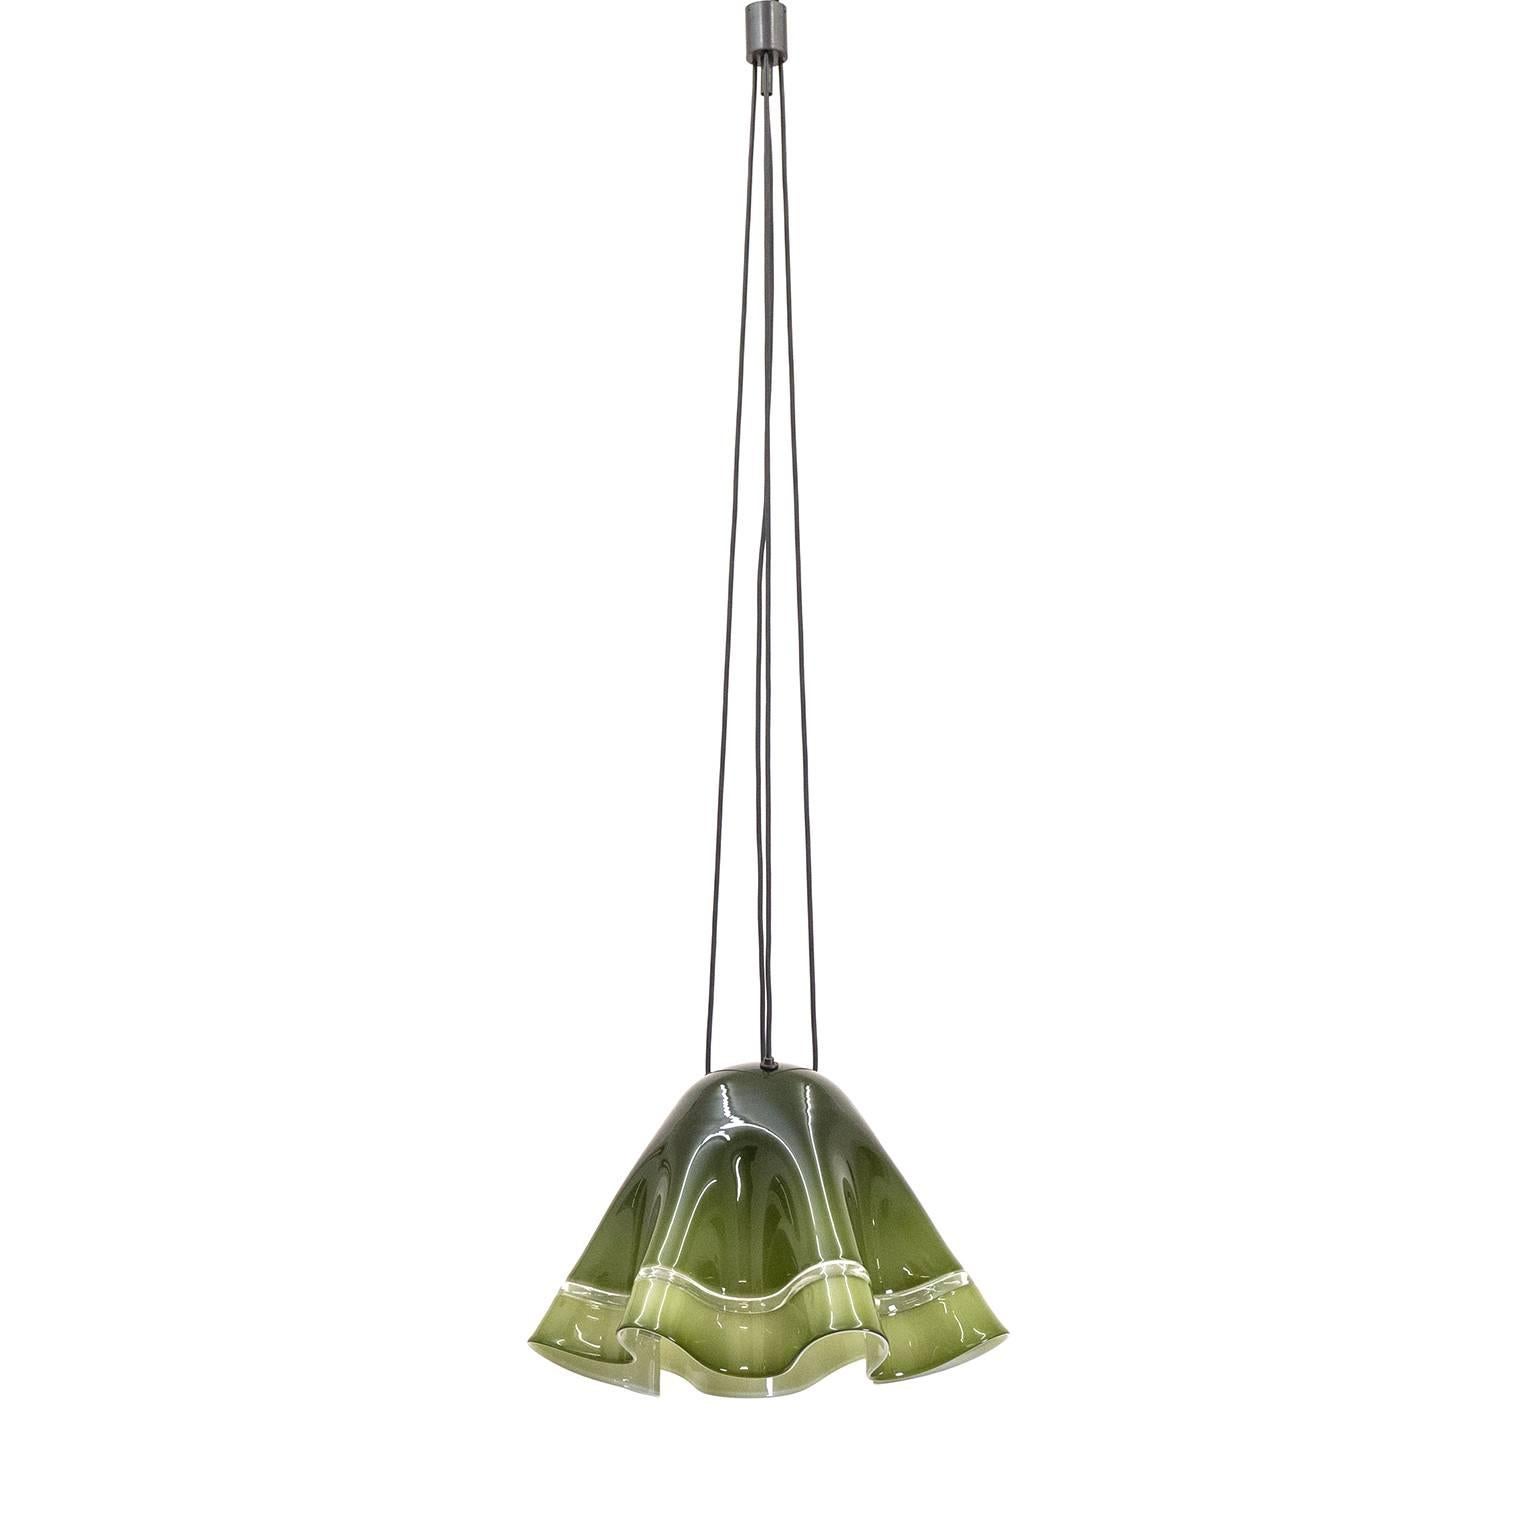 Rare large 'Fazoletto' glass pendant by Vistosi from the 1960s. Made of a deep olive colored glass with a clear glass inset the sculptural shade is suspended by three wires with the E27 socket hanging loosely from a fourth wire. All metal parts are